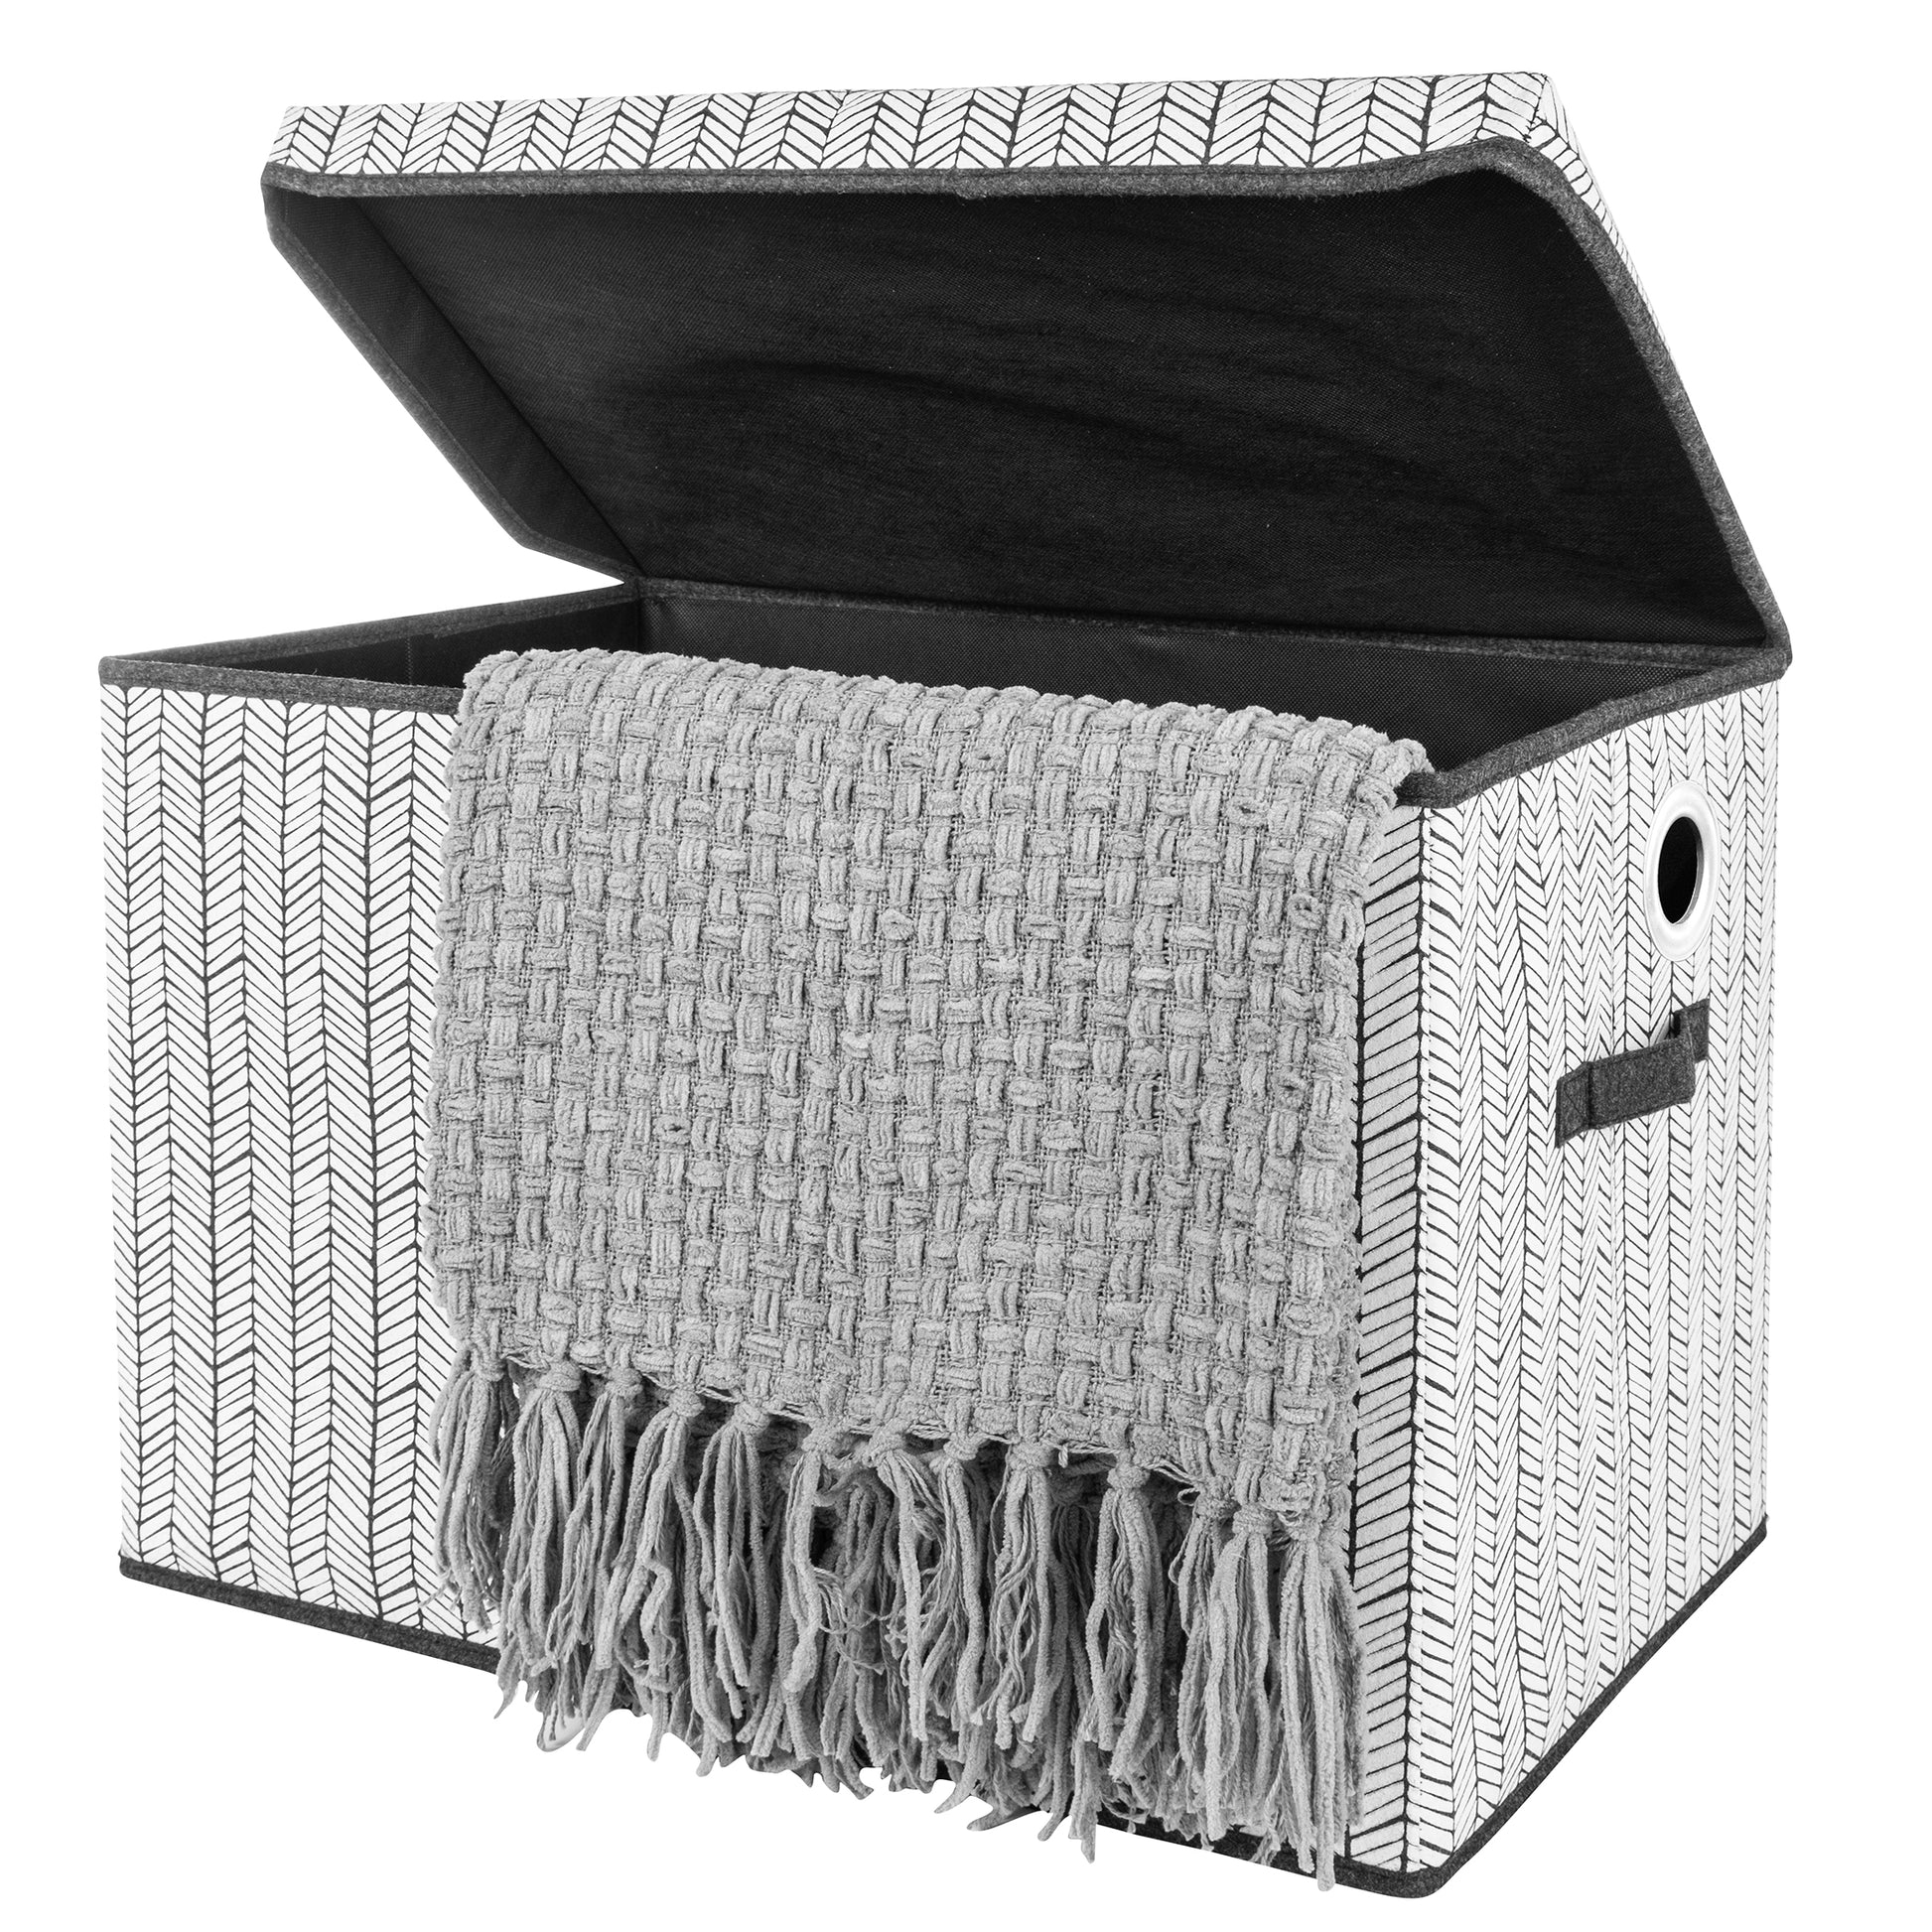 Herringbone Felt Toy Box by Sammy & Lou® Angled with lid open with gray blanket peeking out